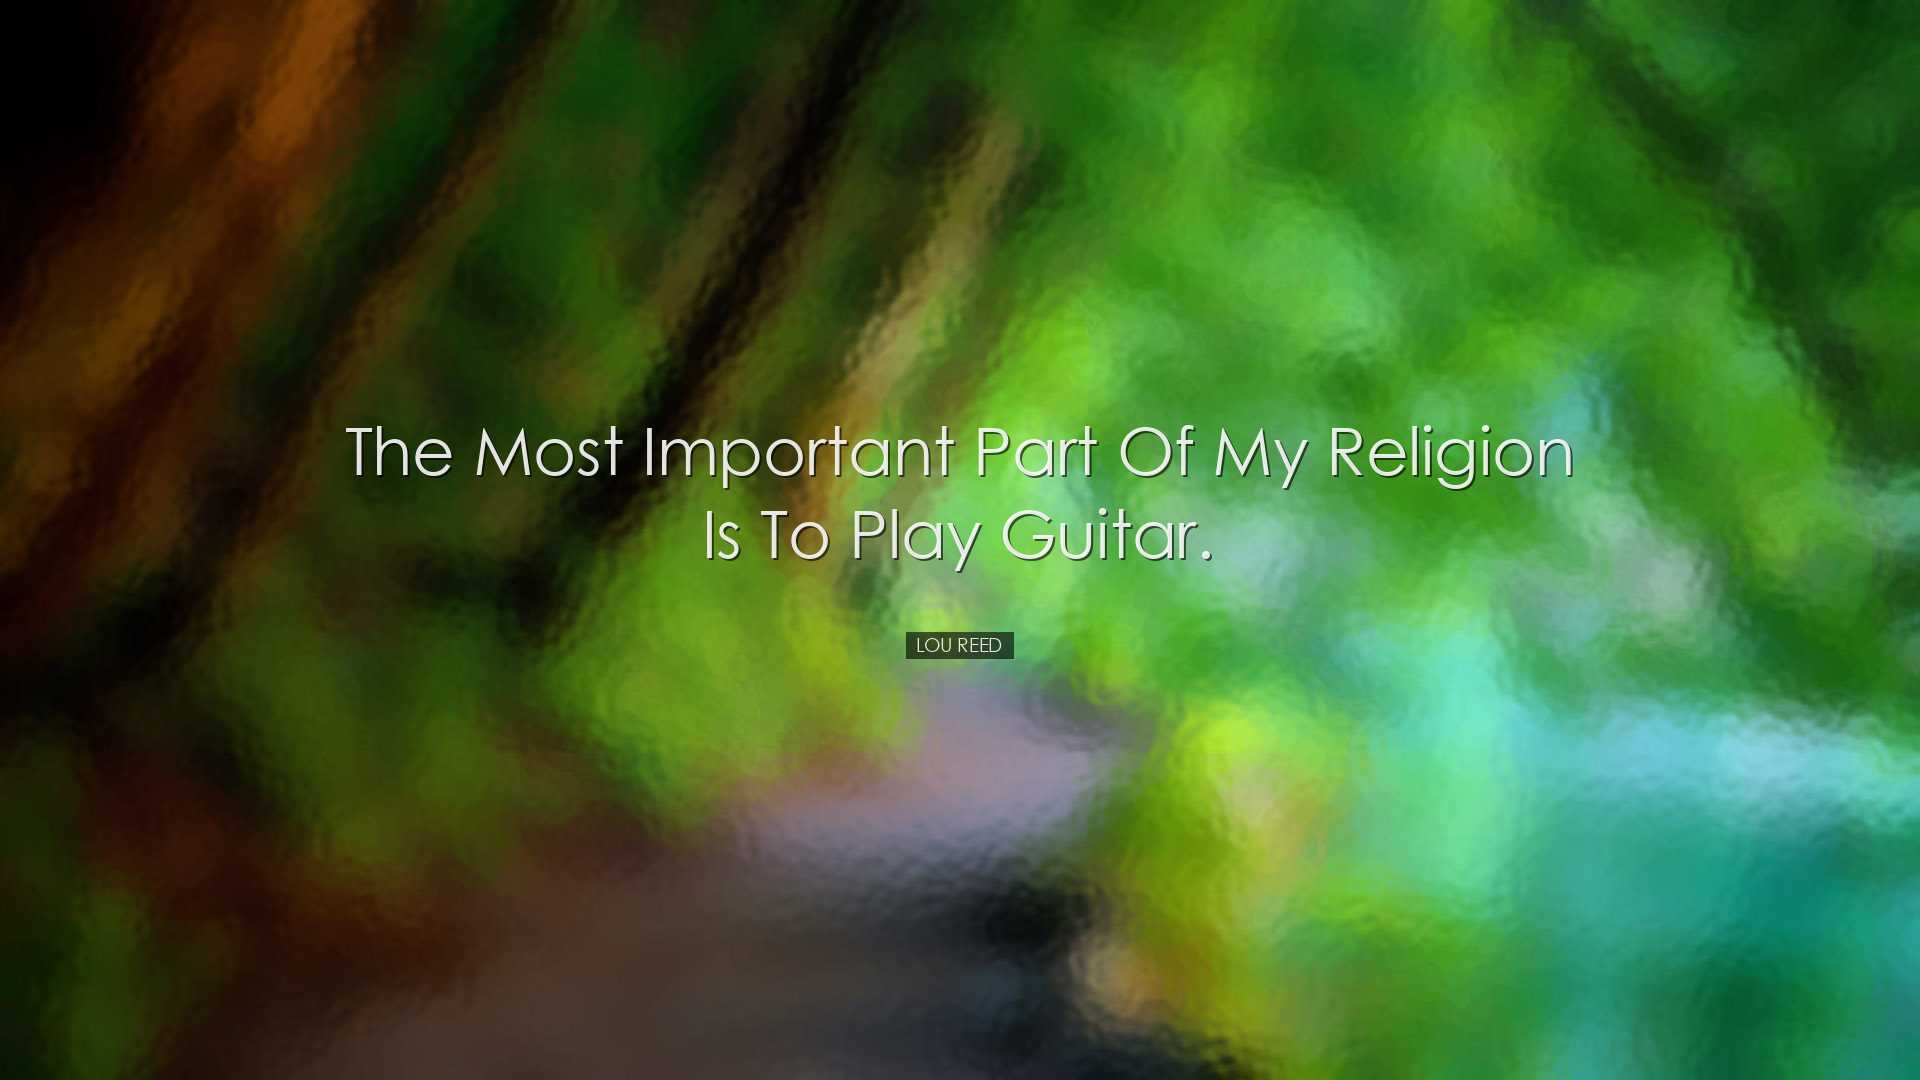 The most important part of my religion is to play guitar. - Lou Re